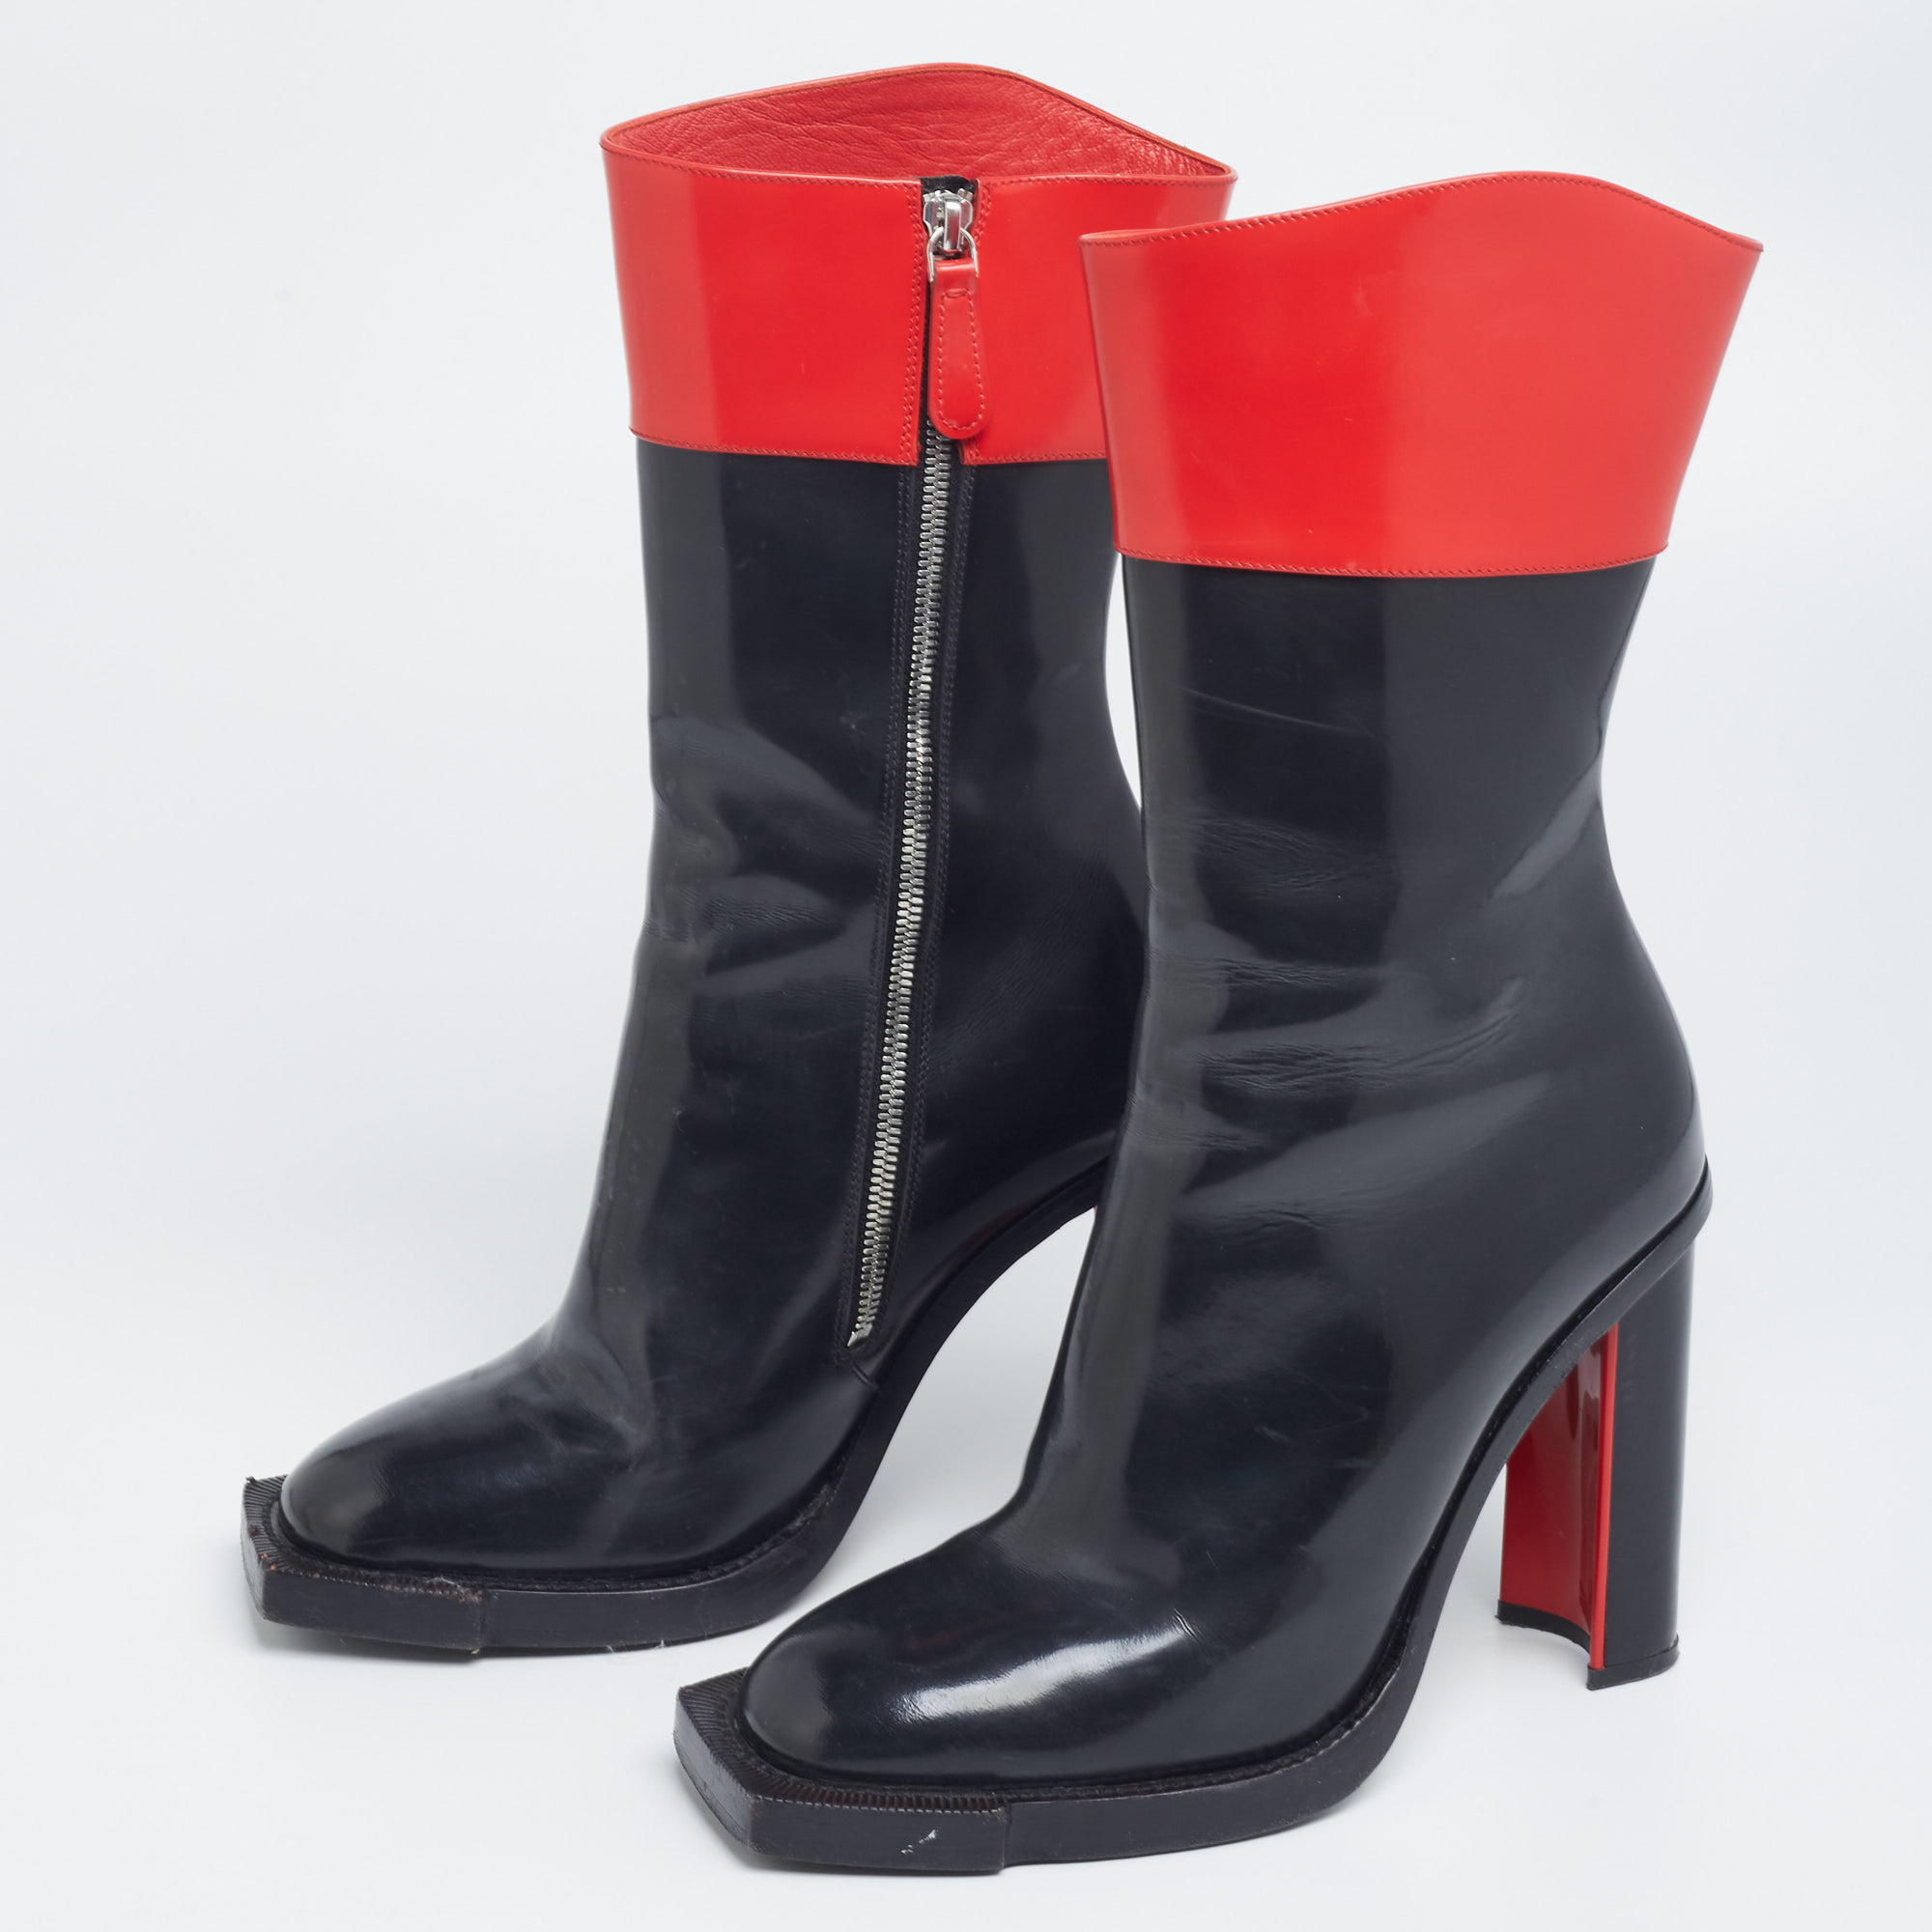 

Alexander McQueen Red/Black Patent Leather Calf Length Boots Size